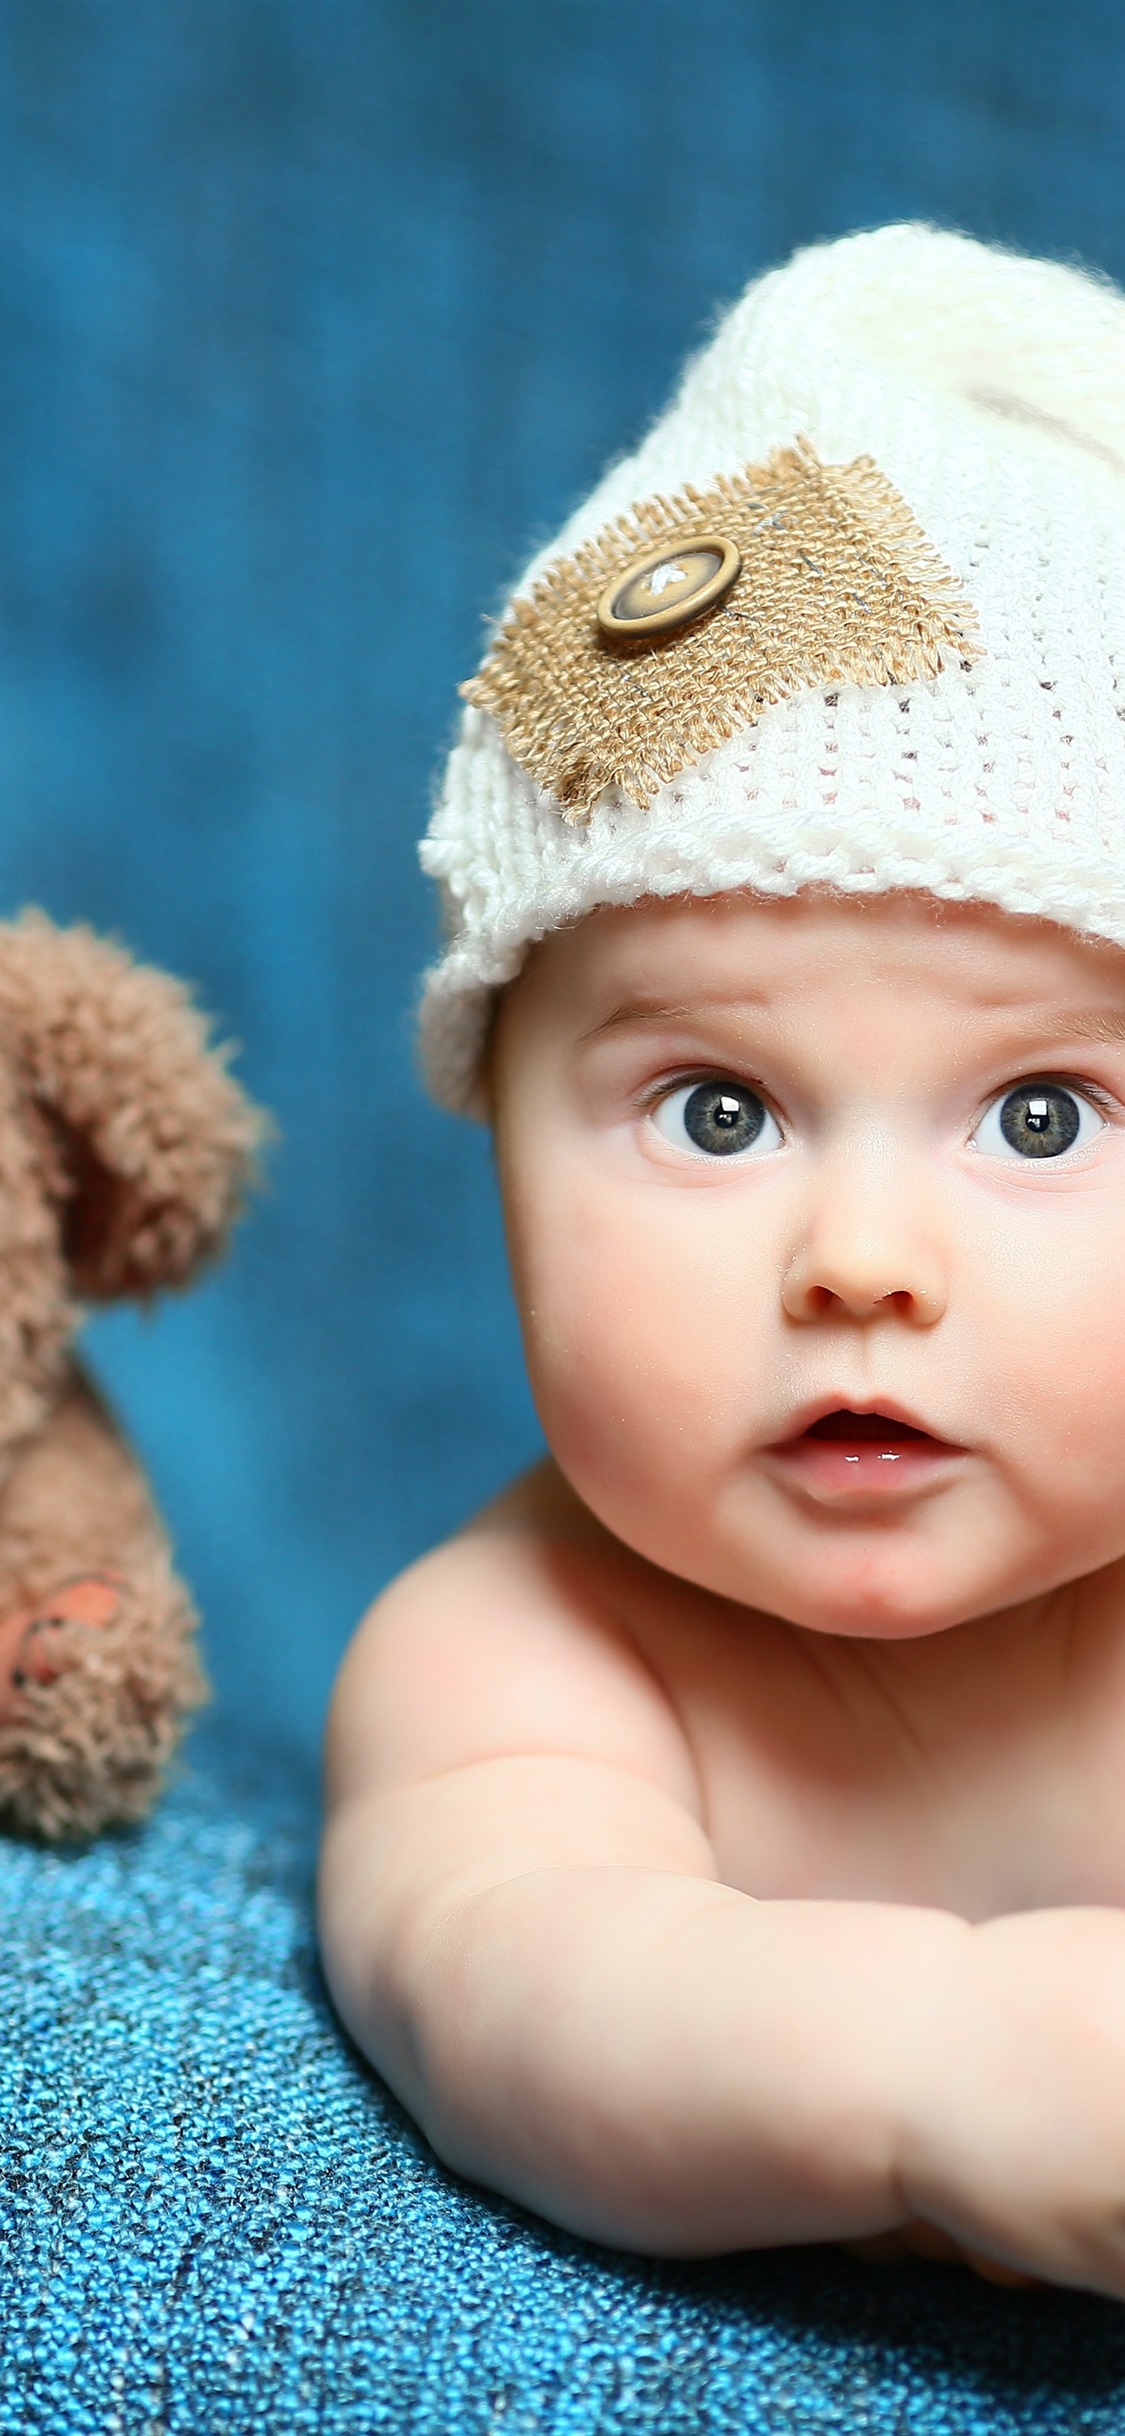 Iphone Wallpaper Cute Baby And Toy Bear - Calendar 2020 With Baby , HD Wallpaper & Backgrounds